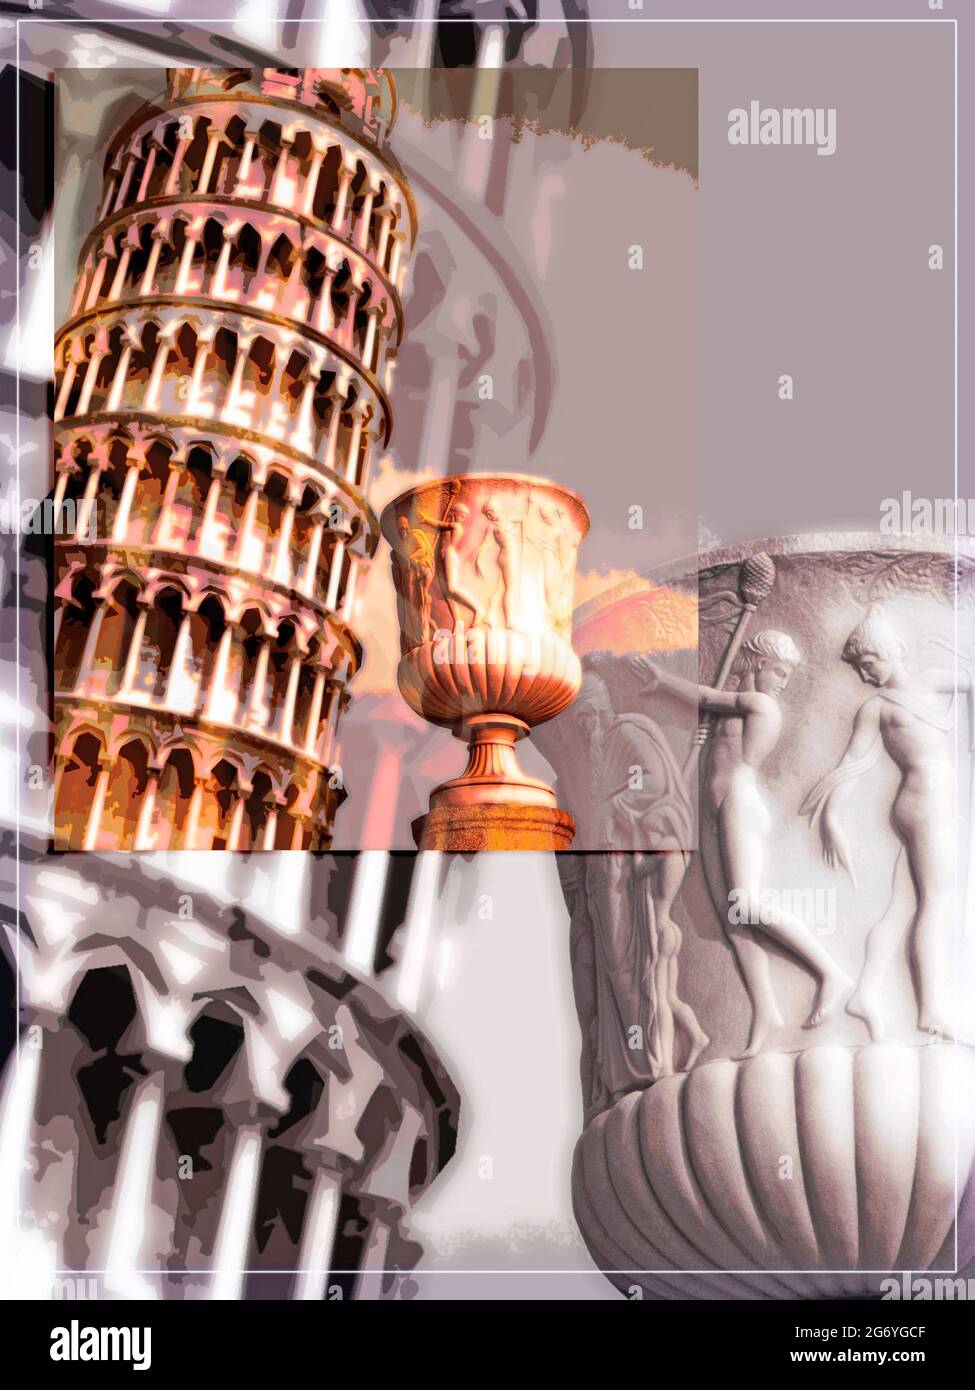 Italy, Pisa, Leaning Tower with vase, arty, Stock Photo